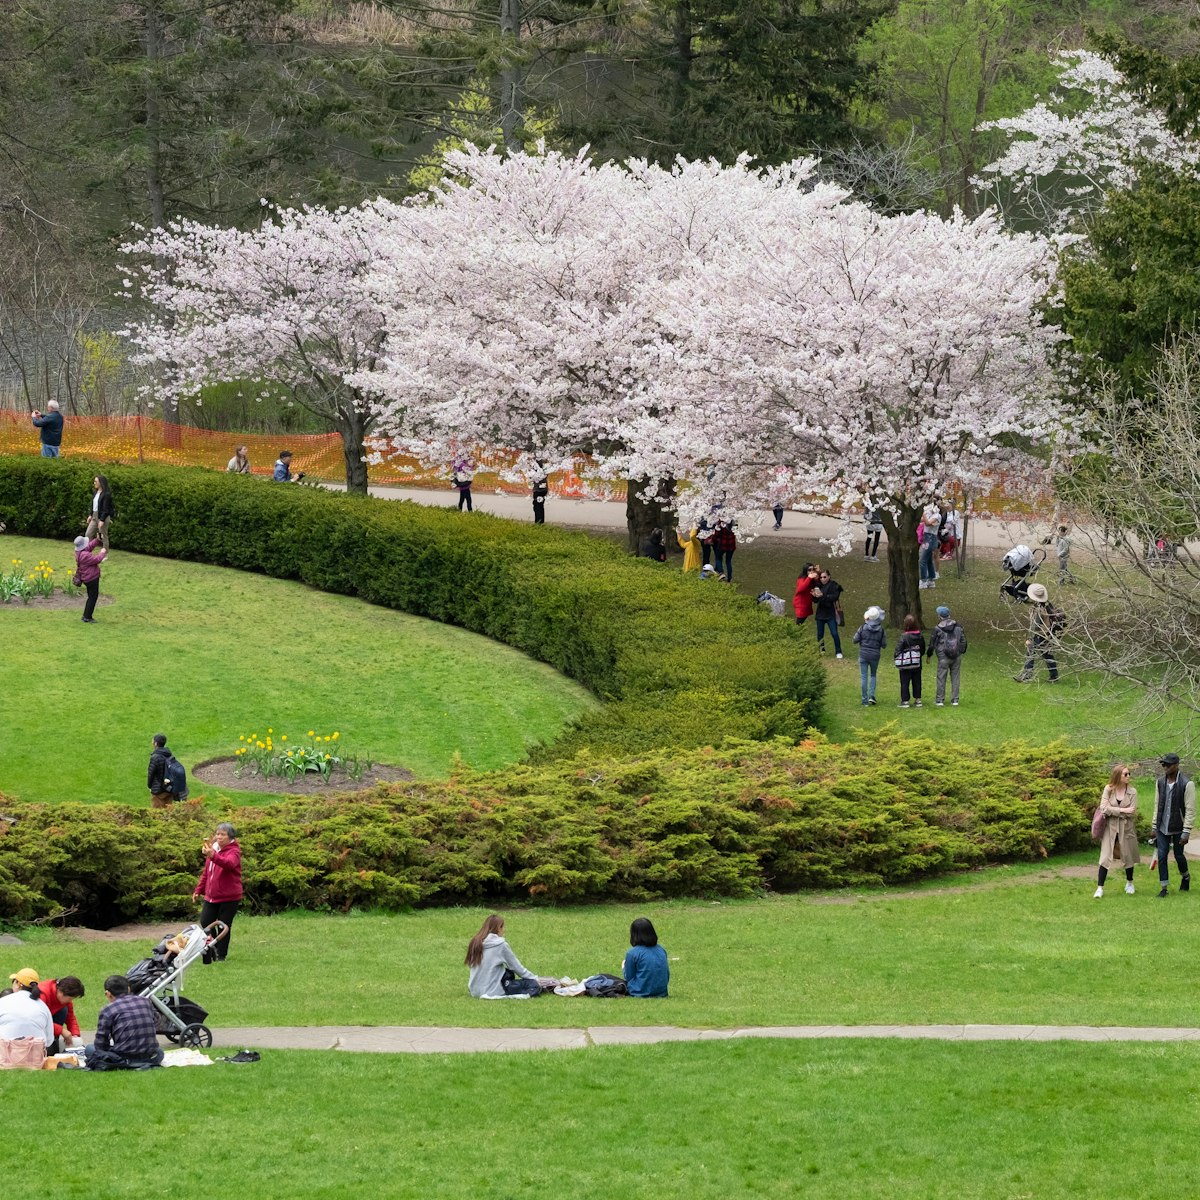 Toronto, Ontario / Canada - May 16 2019: Spring scene of people enjoying the views of white full bloom cherry blossom at High Park. Men, women, kids spending time outdoor, spring season concept.; Shutterstock ID 1400380913; your: Sloane Tucker; gl: 65050; netsuite: Online Editorial; full: Toronto Top Things to Do Article
1400380913